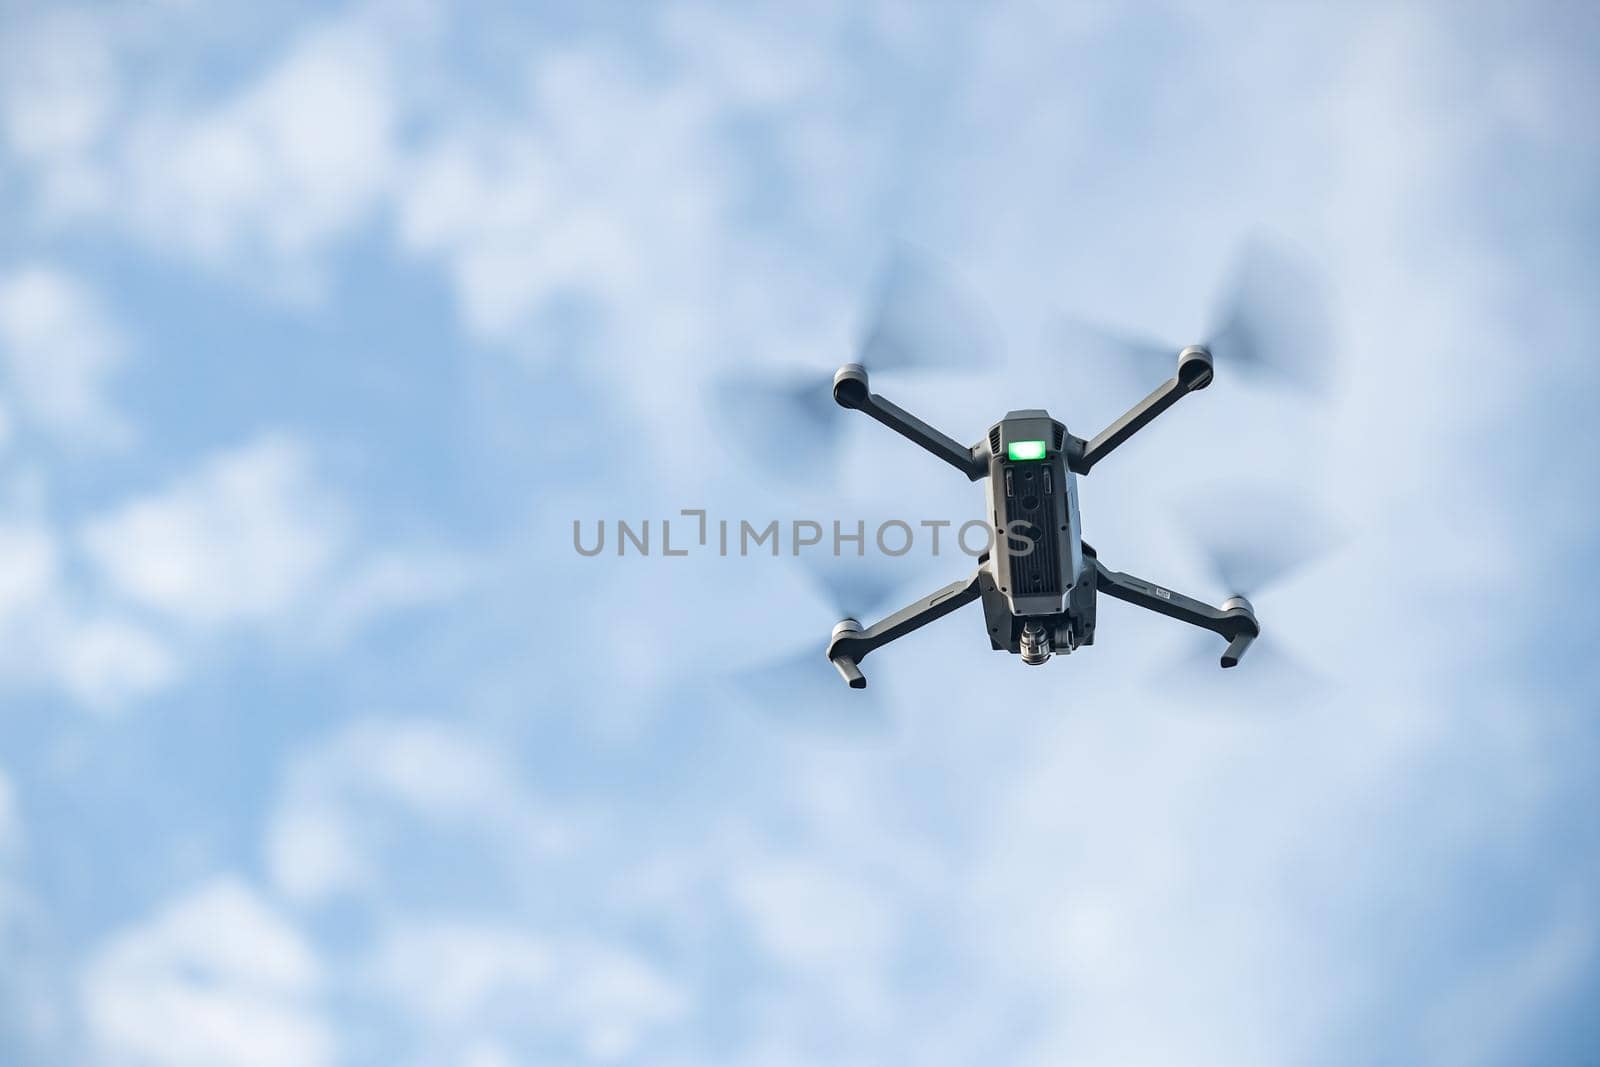 The flying soaring drone in the sky, the blue sky with white clouds, sunny weather, Turning propellers, nobody. High quality photo